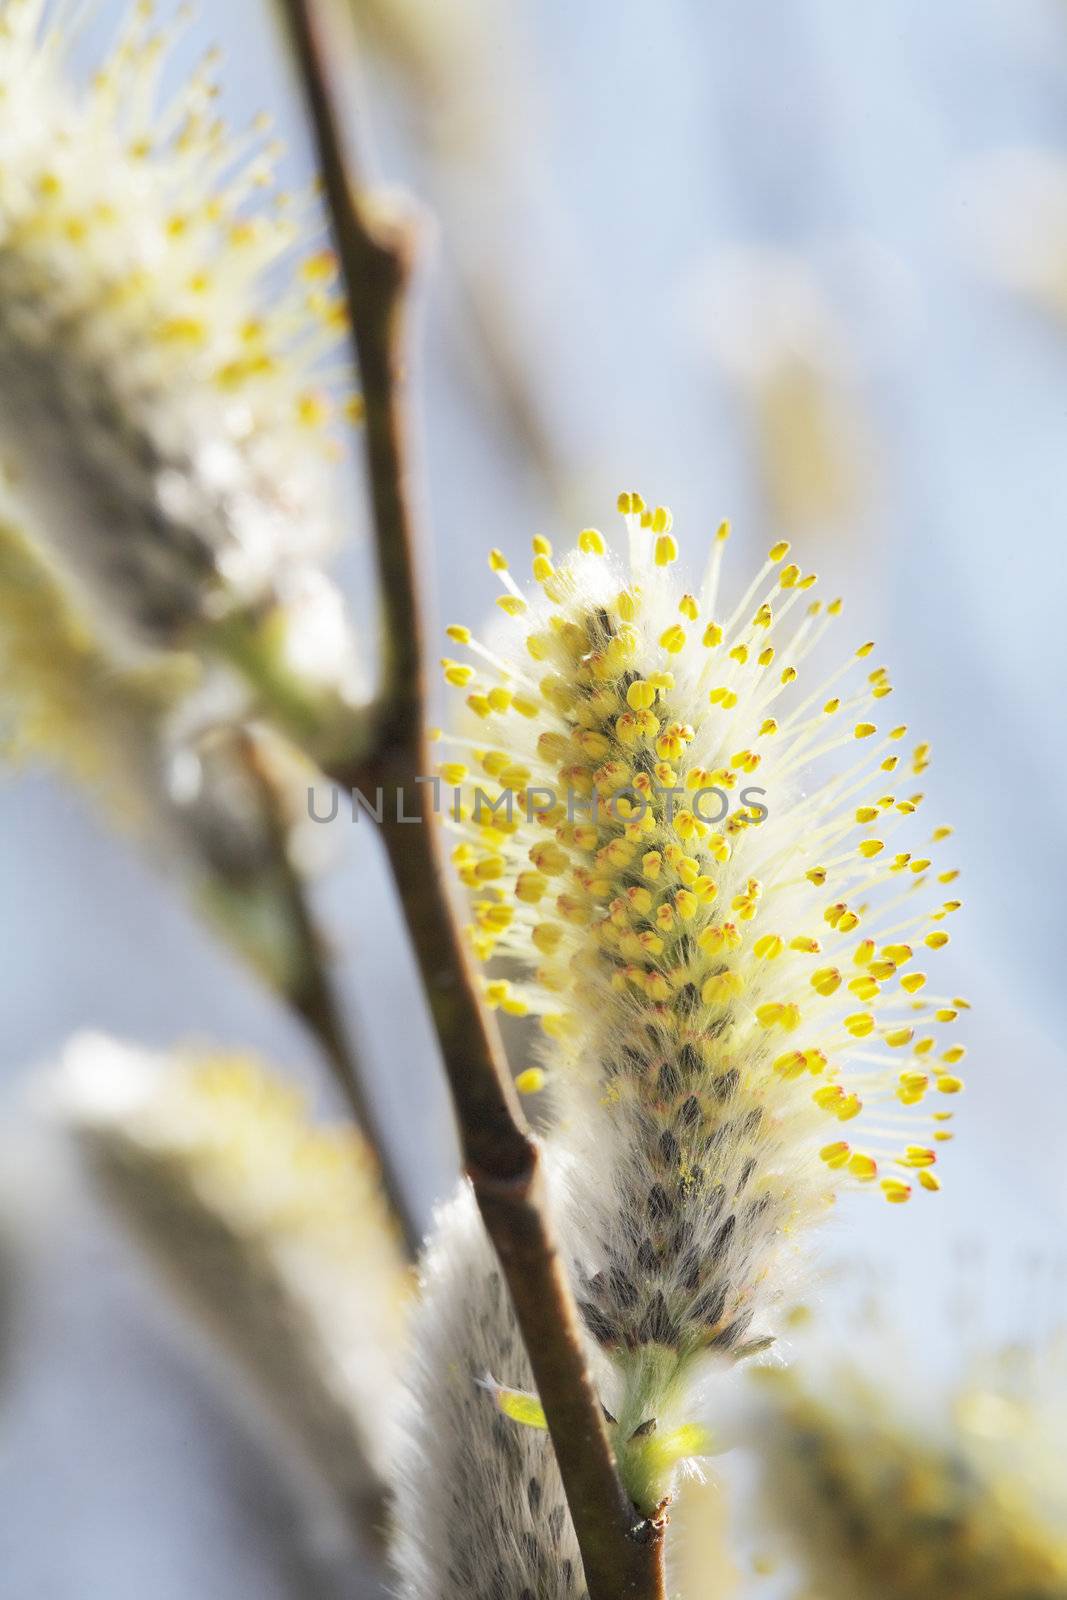 Willow Catkins by Stocksnapper